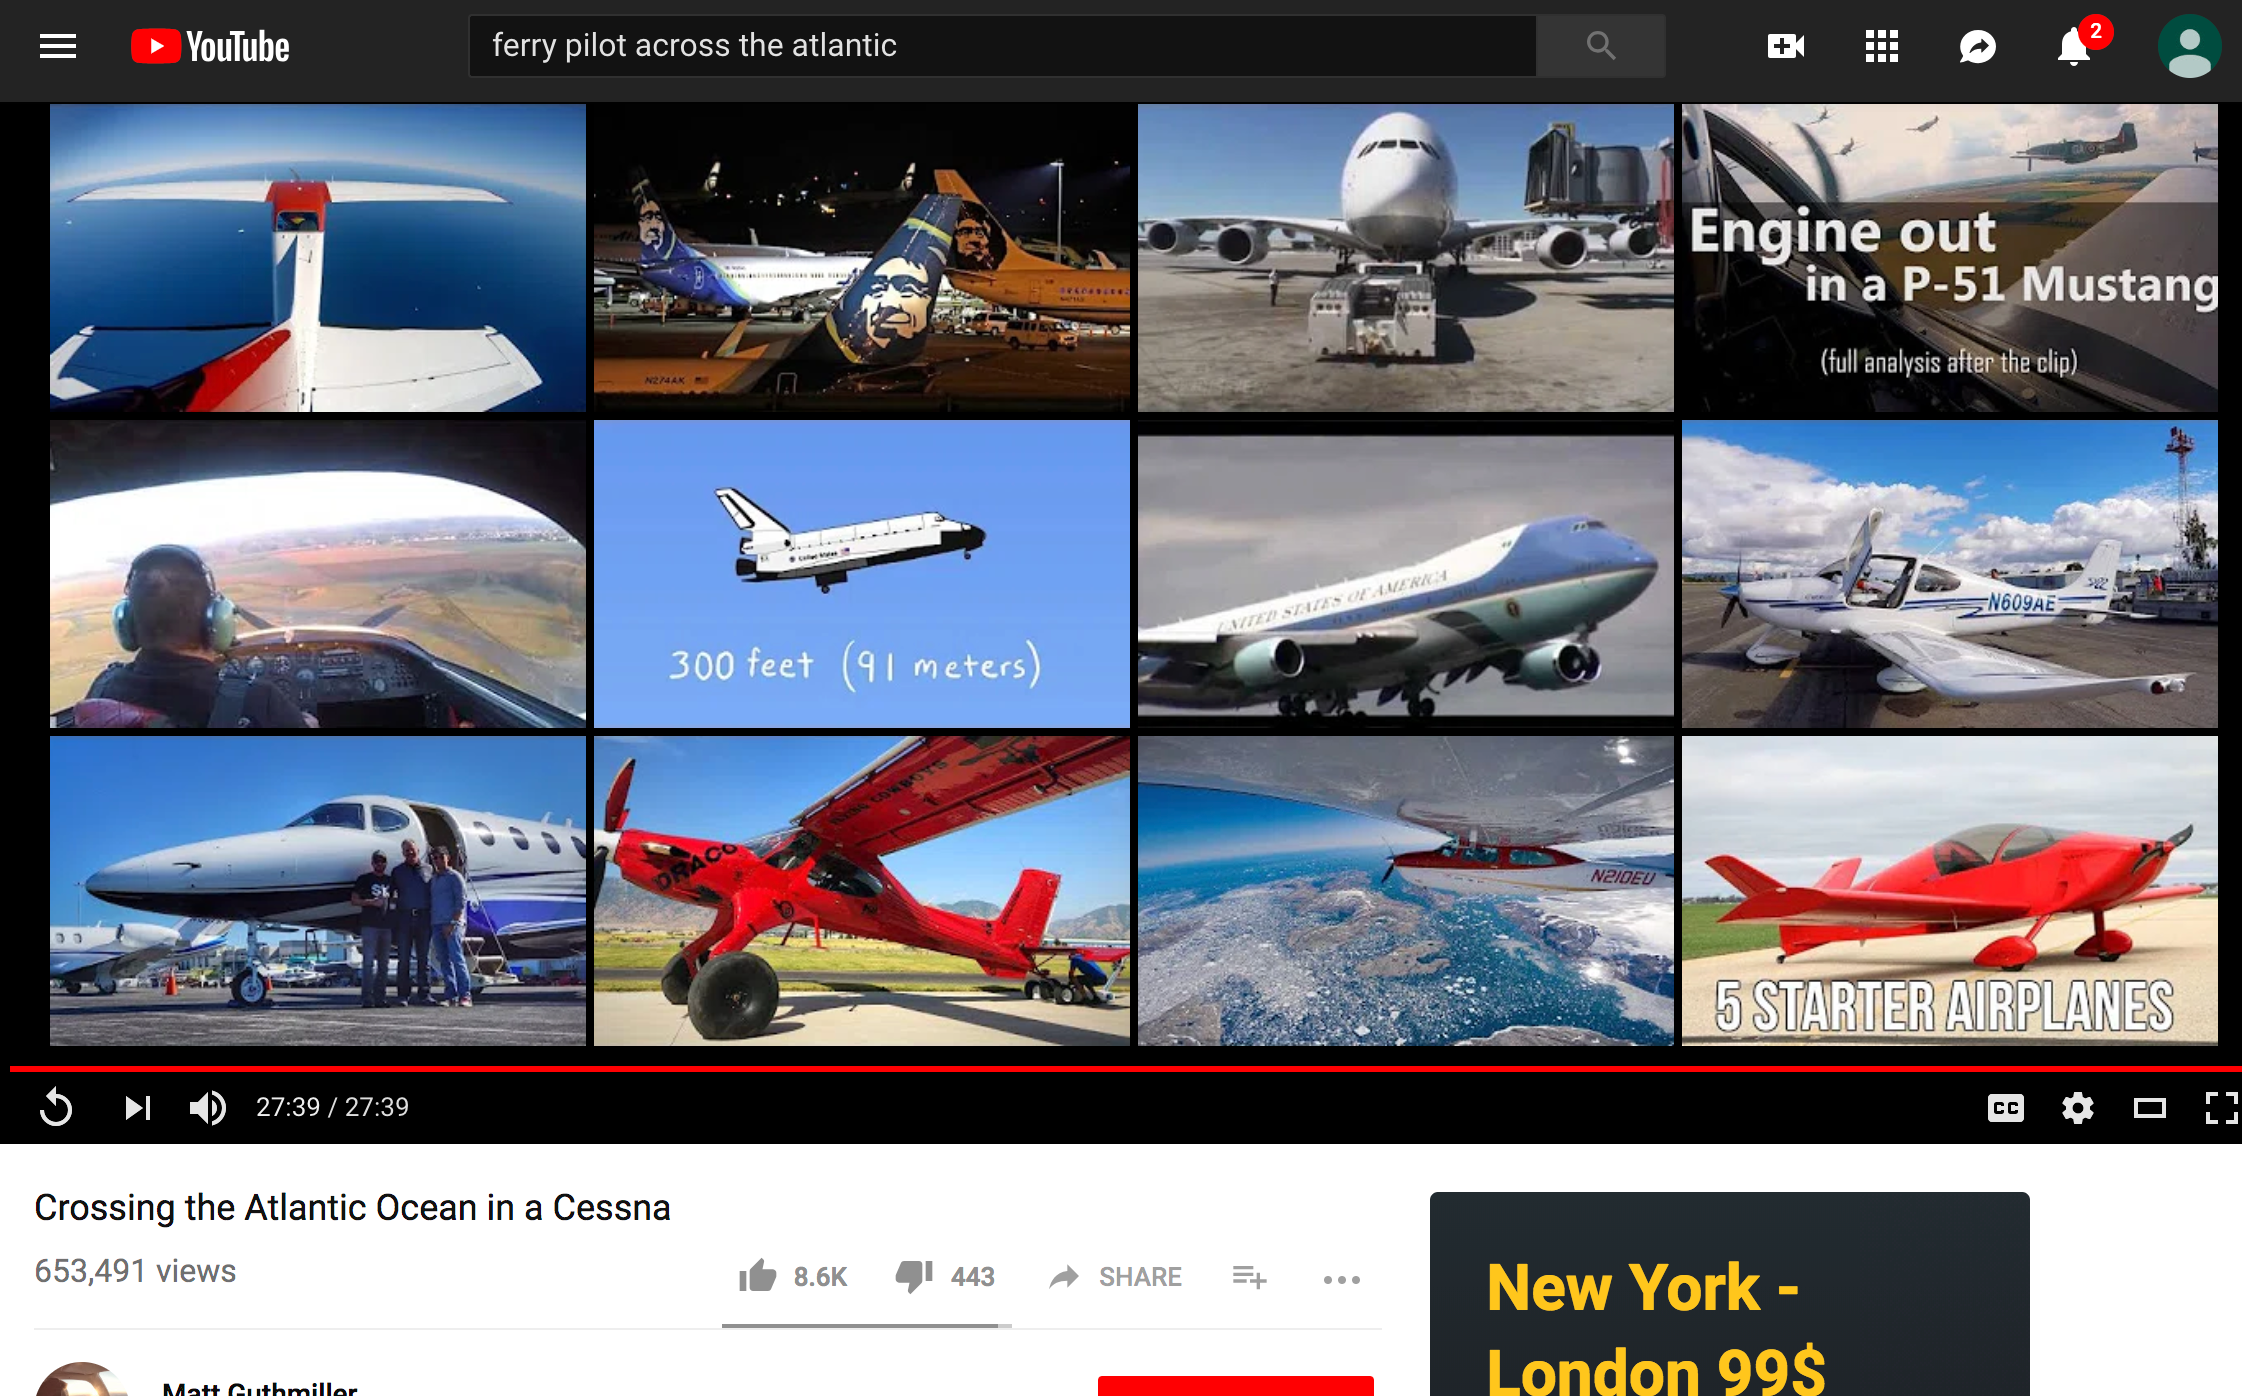 10 Great Aviation Documentaries to Watch on YouTube